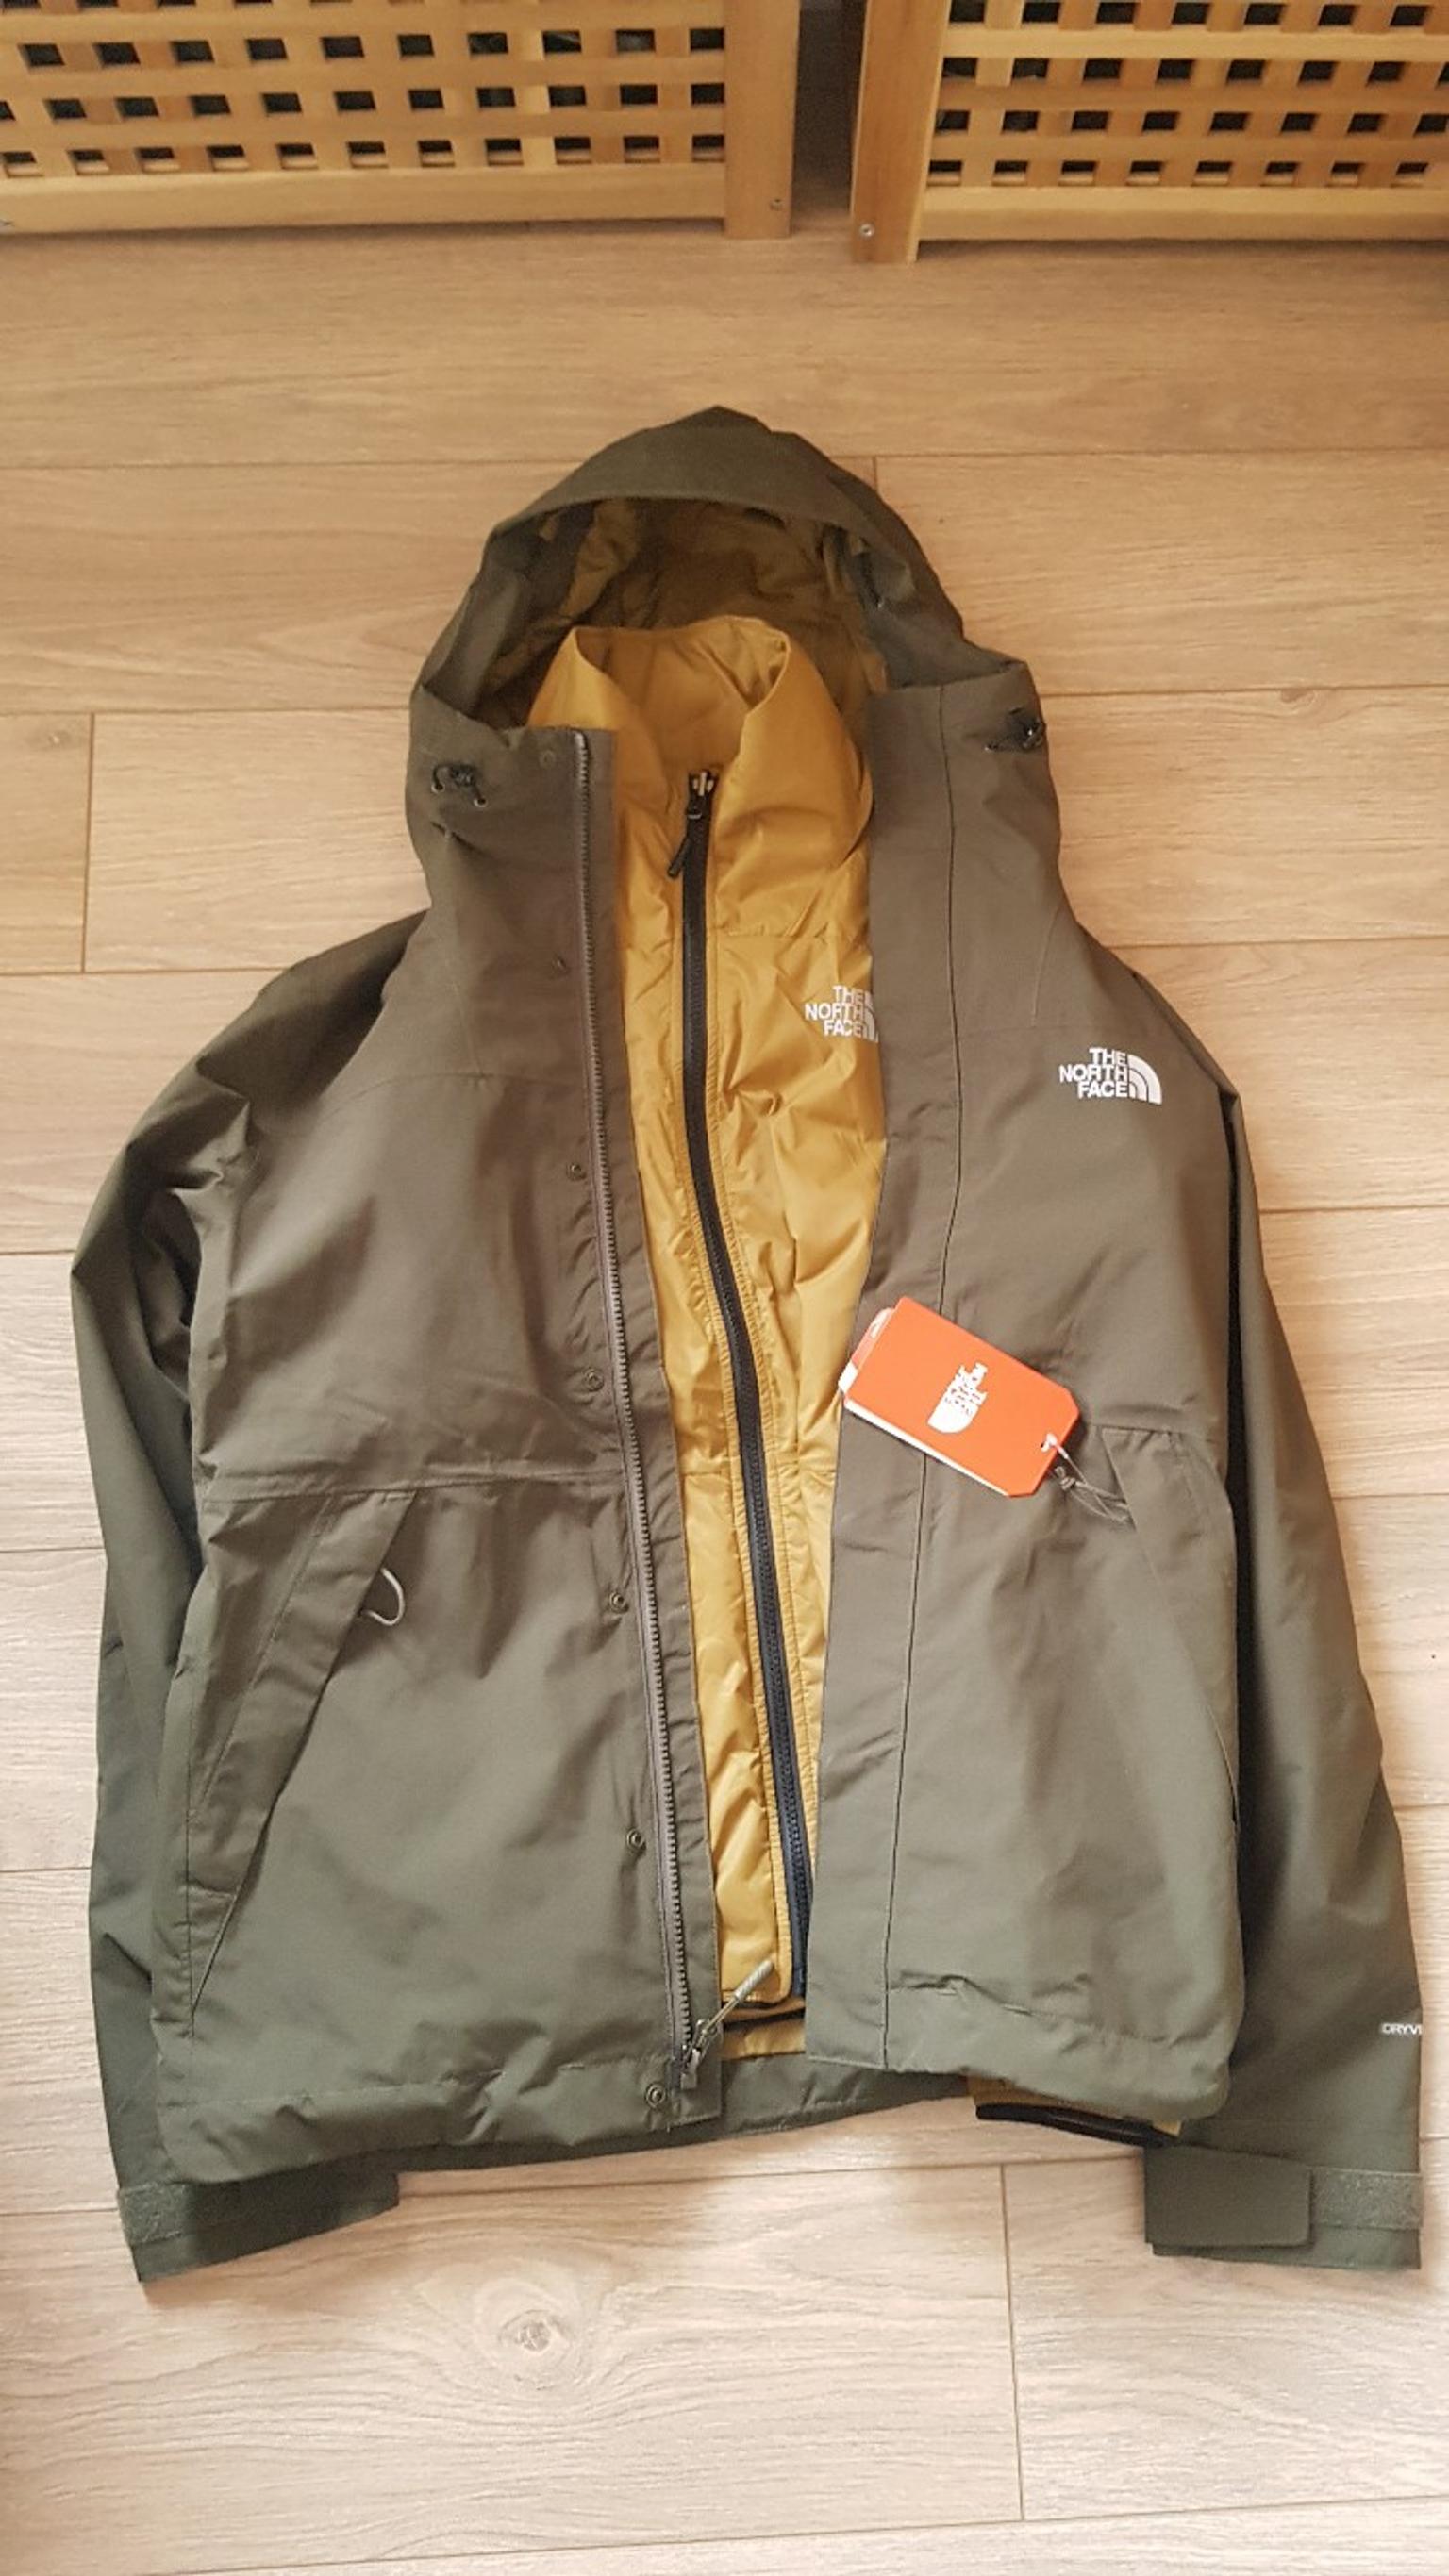 north face m naslund triclimate